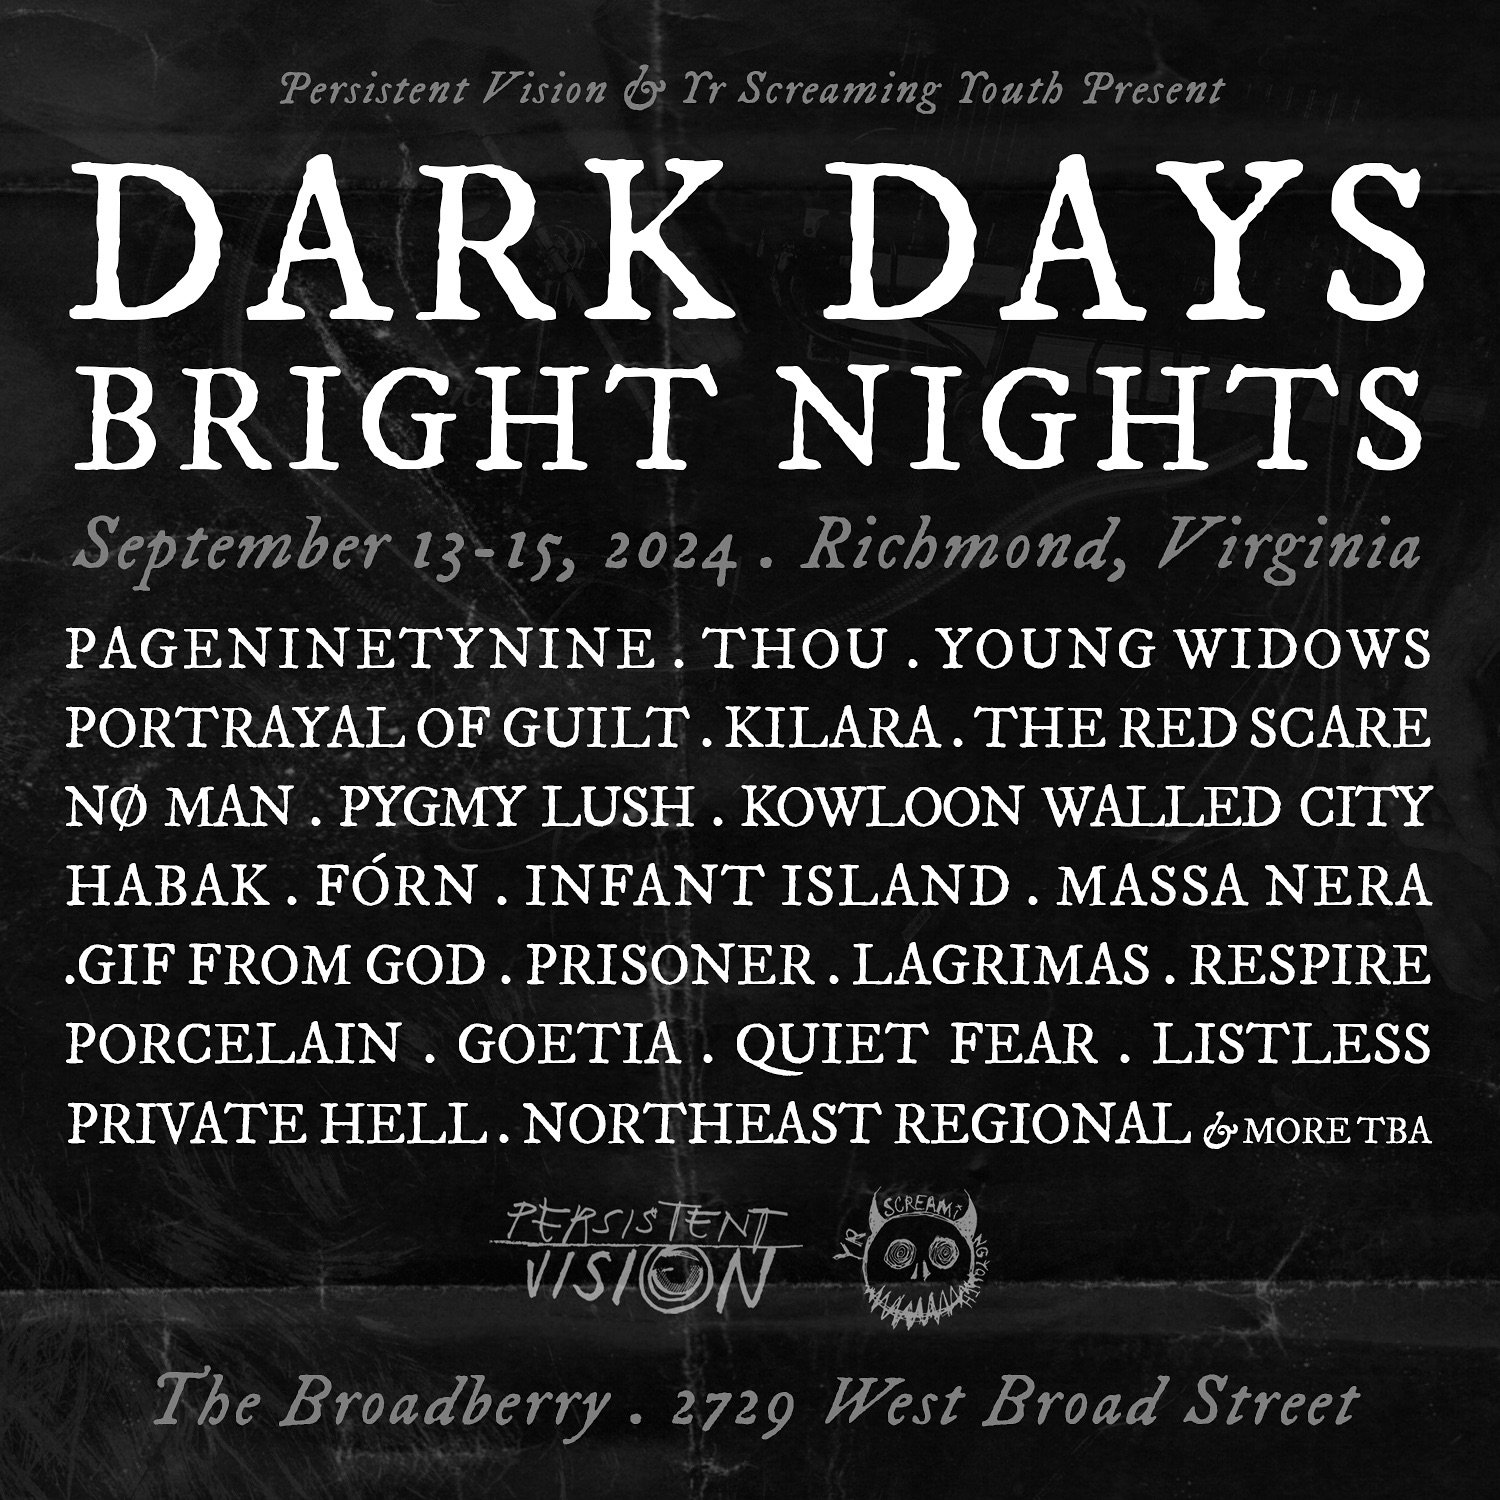 Scheduled for September 13-15, 2024 at The Broadberry in Richmond, Virginia, @darkdaysbrightnightsva is a new music fest offering an electrifying lineup of bands from across the spectrum of punk, hardcore, and metal.

Founders Paul Hansbarger (Persis